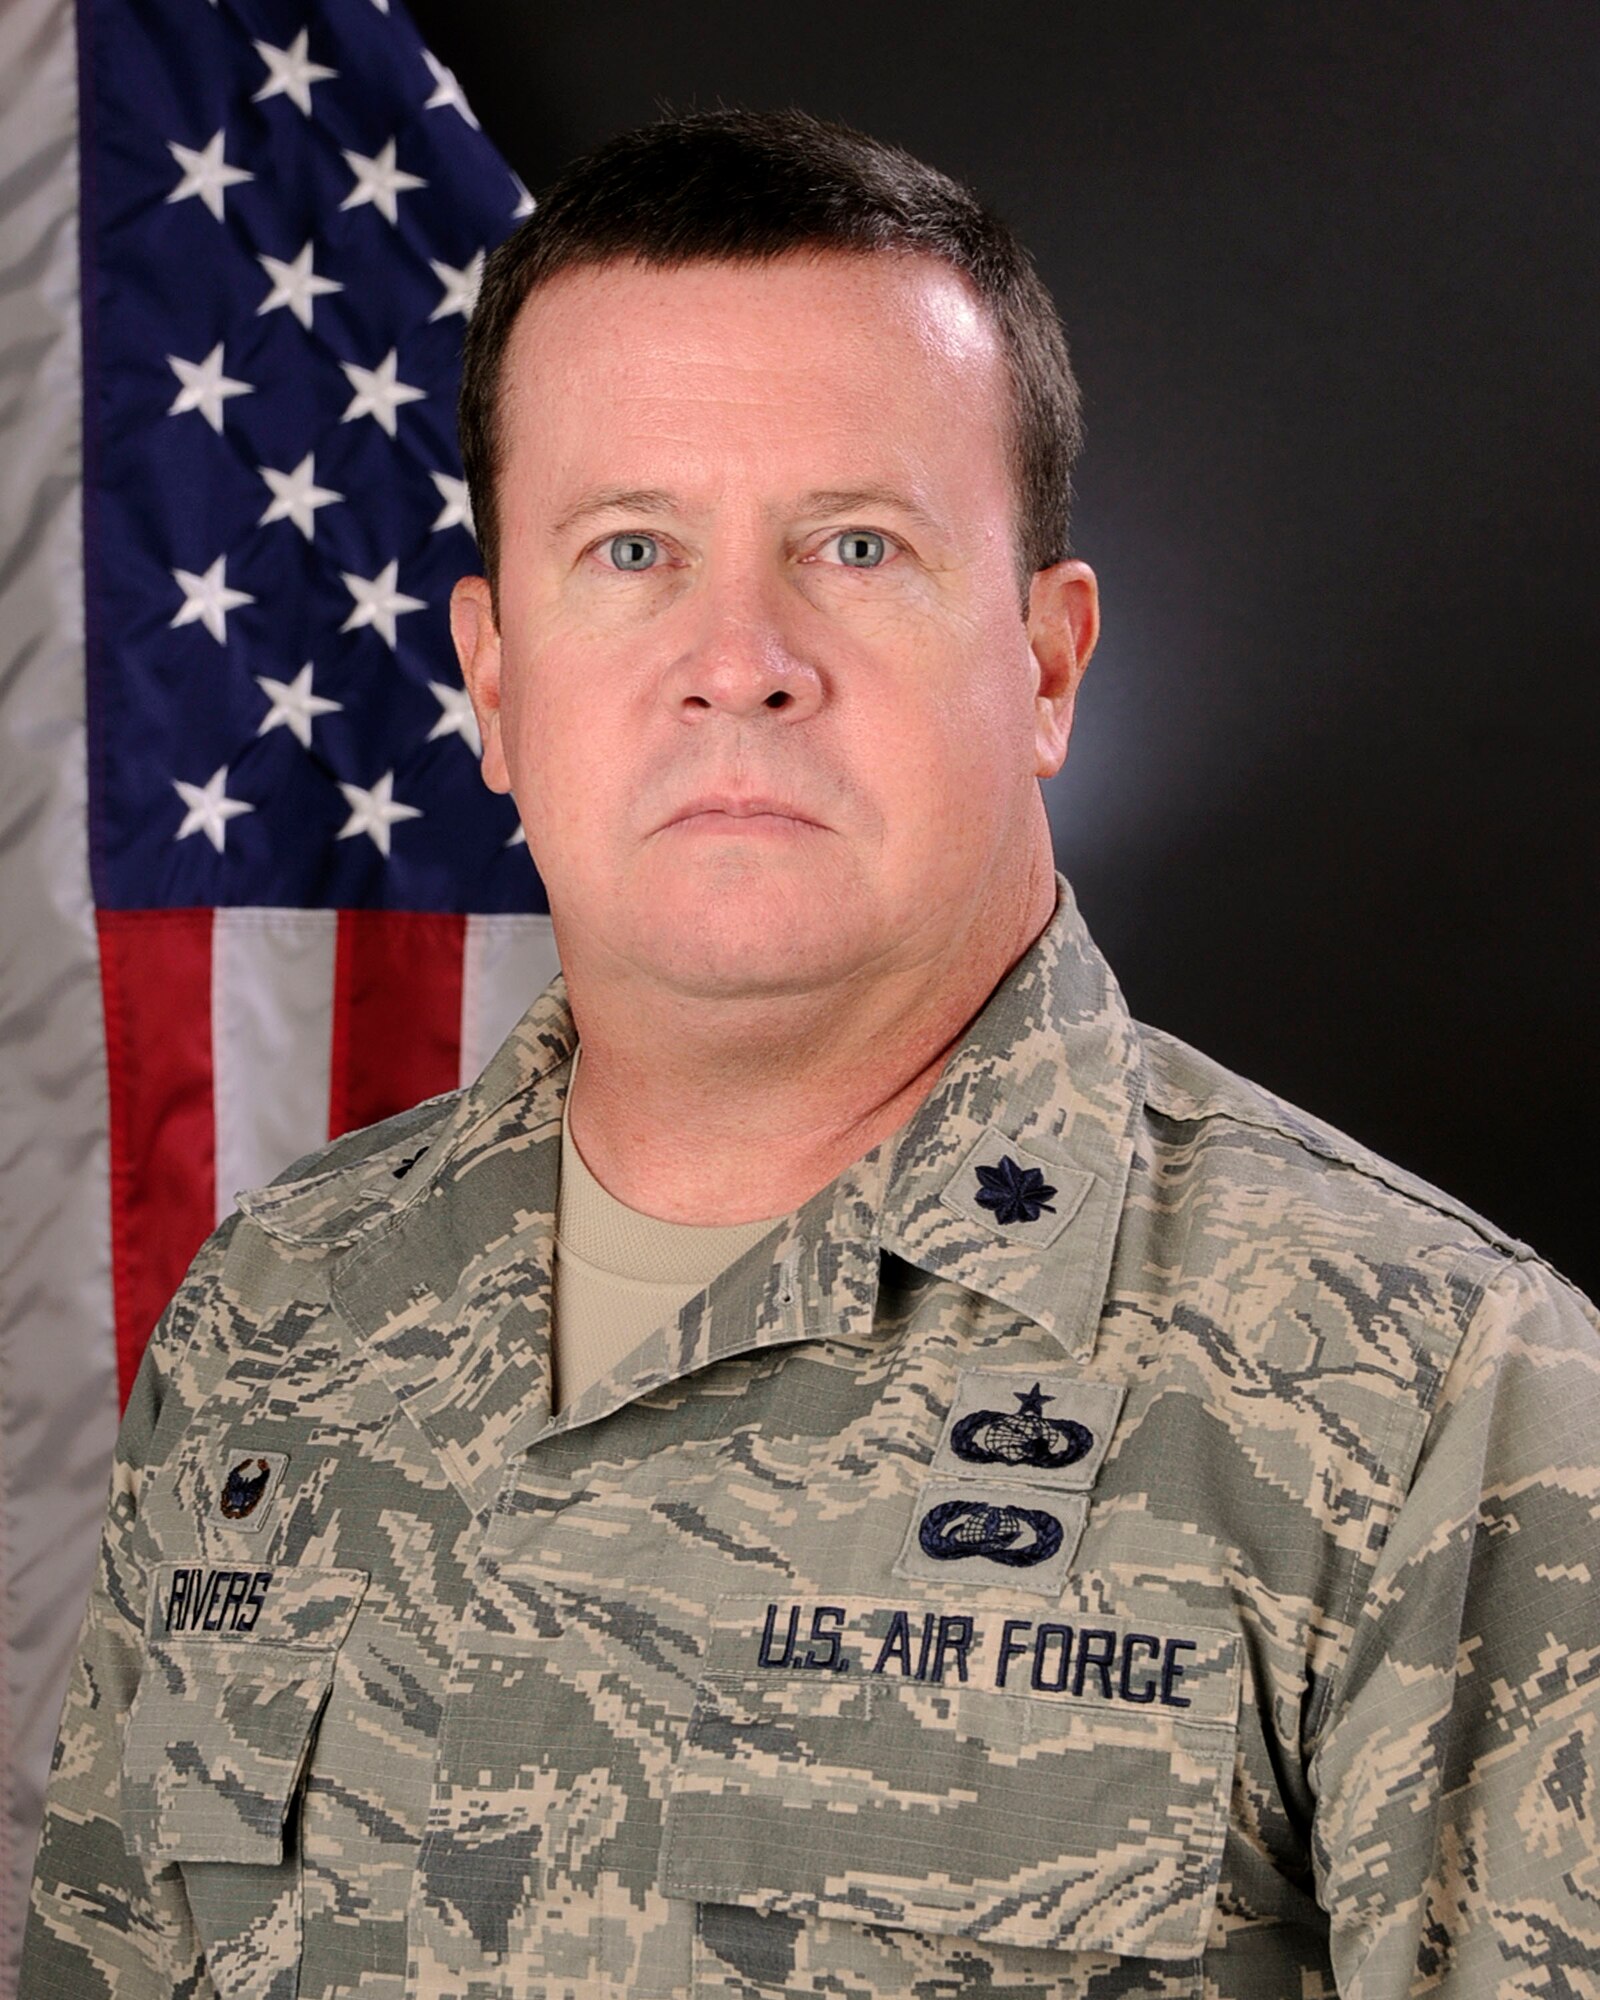 U.S. Air Force Lt. Col. Thomas “Wade” Rivers, commander of the 169th Communications Flight, South Carolina Air National Guard at McEntire Joint National Guard Base, April 24, 2015.  (U.S. Air National Guard photo by Tech. Sgt. Caycee Watson/Released)